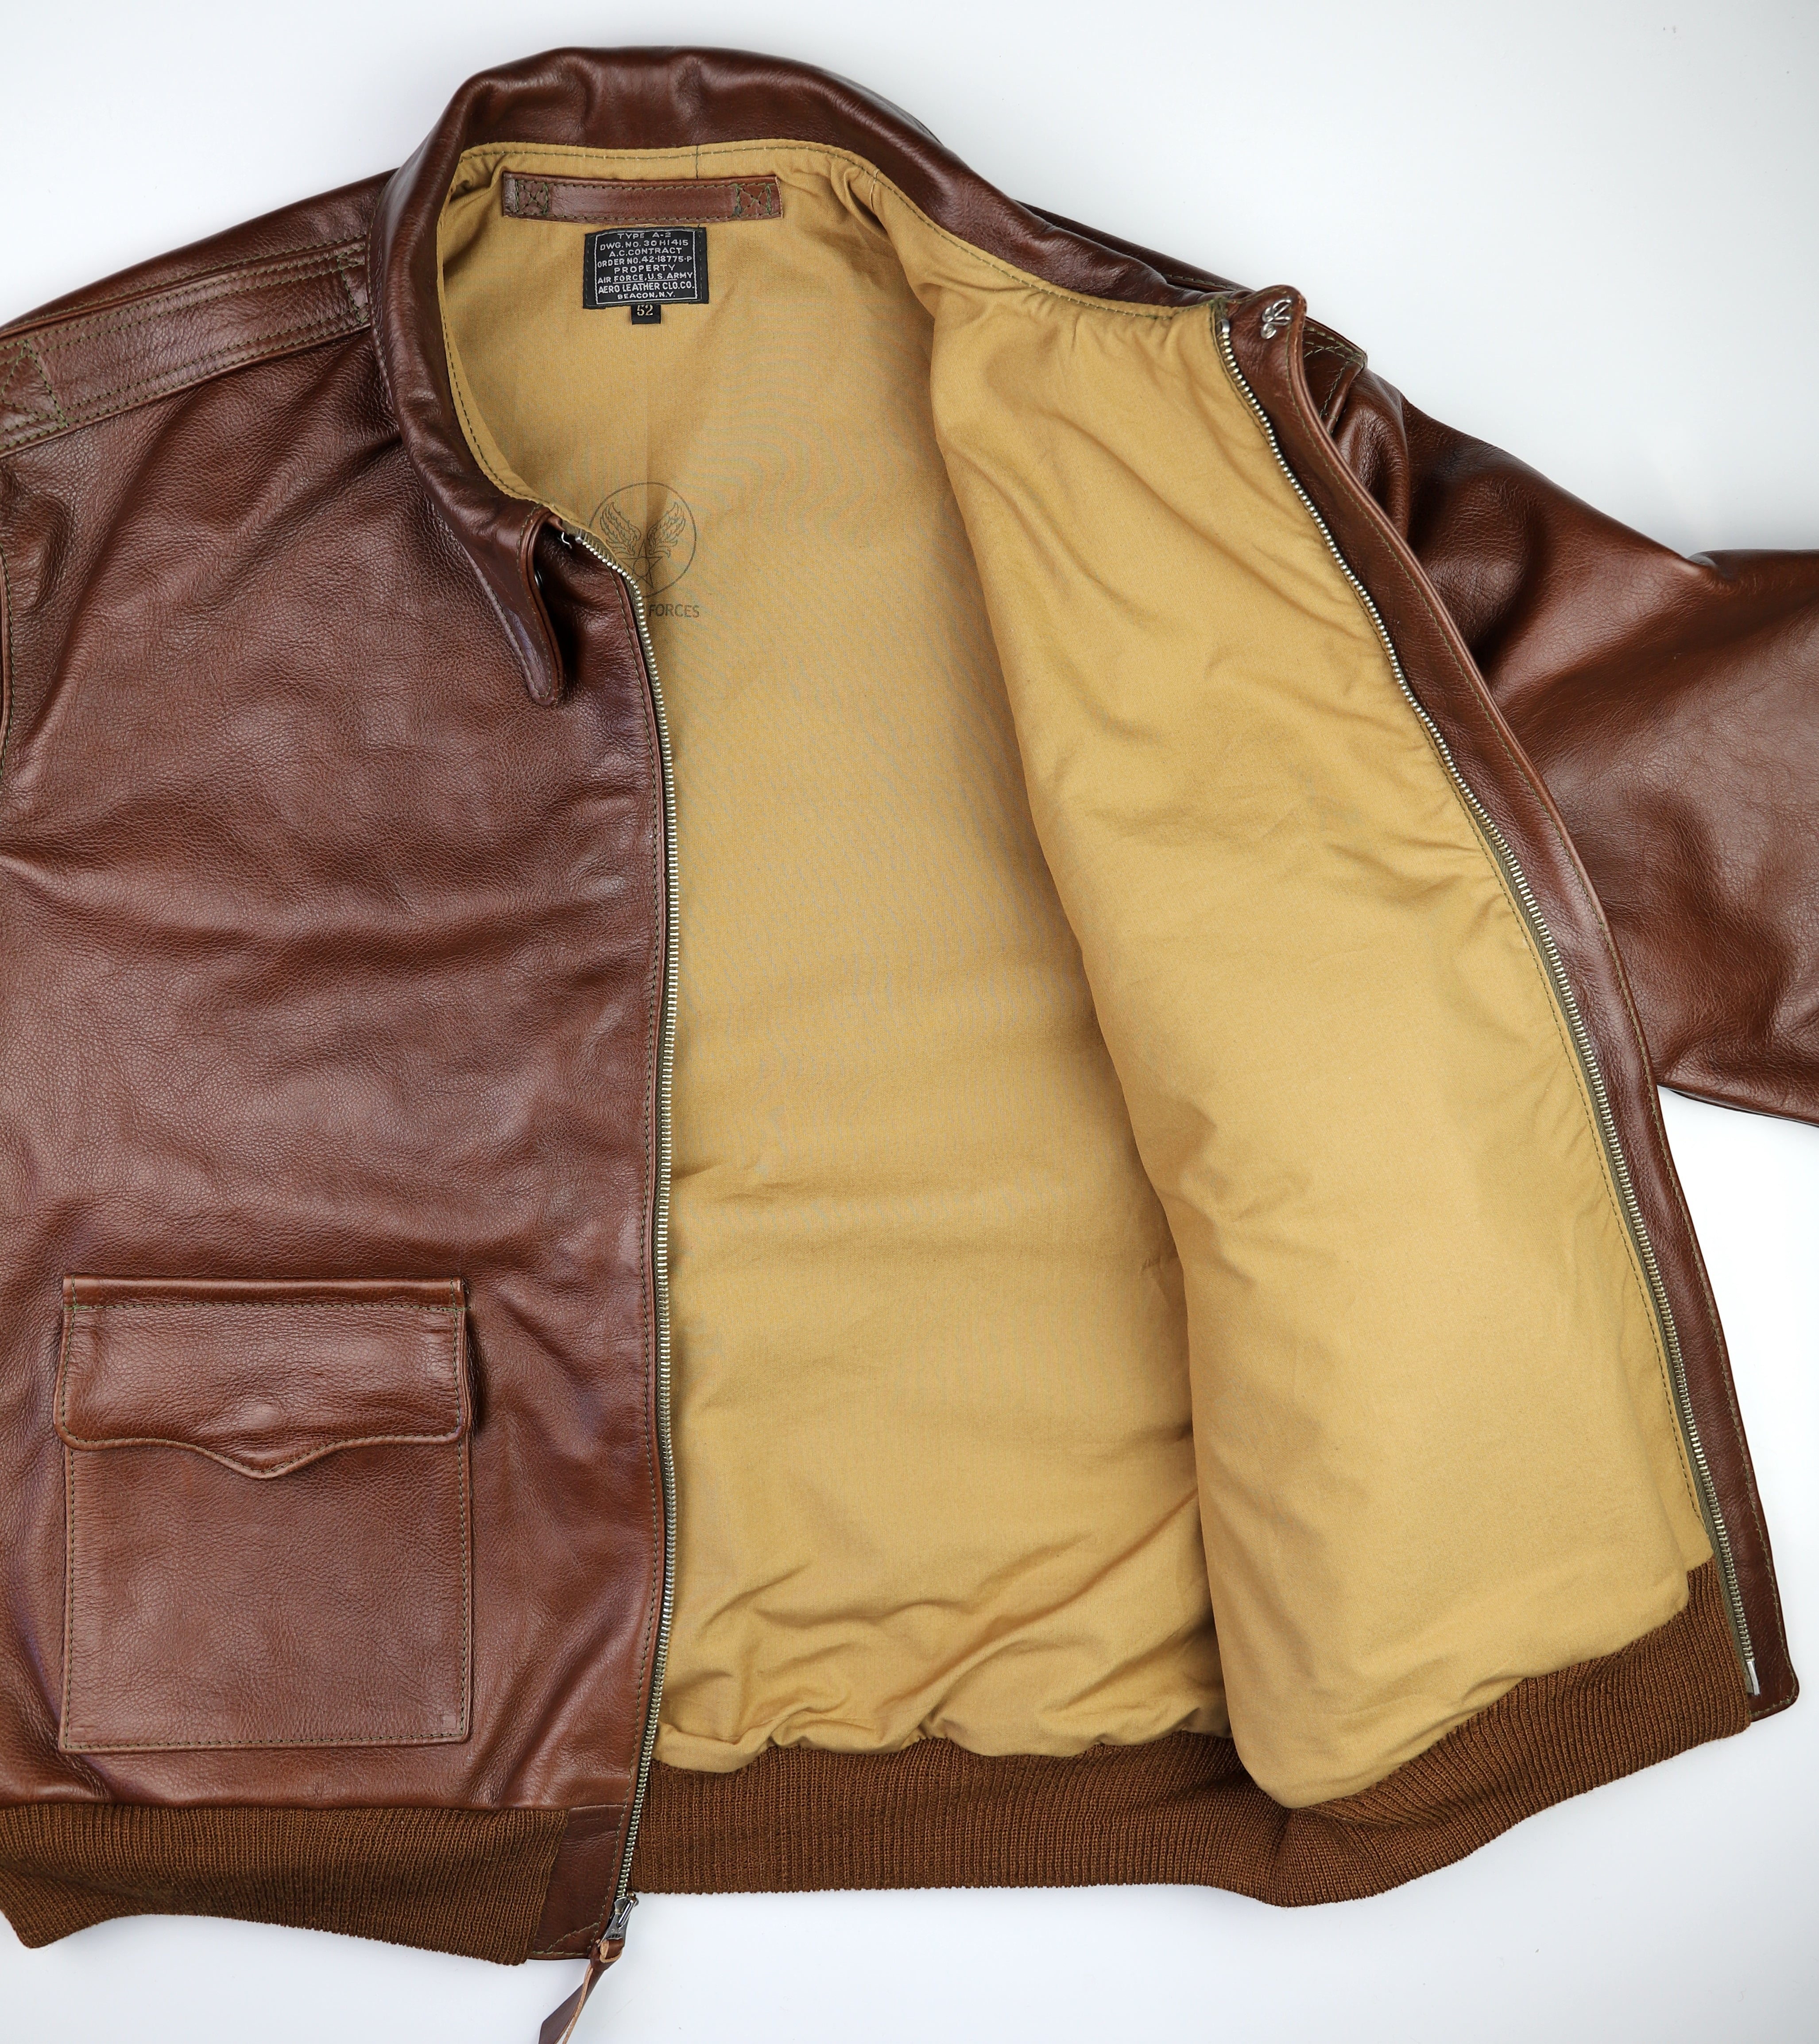 Aero A-2 Military Flight Jacket, size 52, Russet Vicenza Horsehide